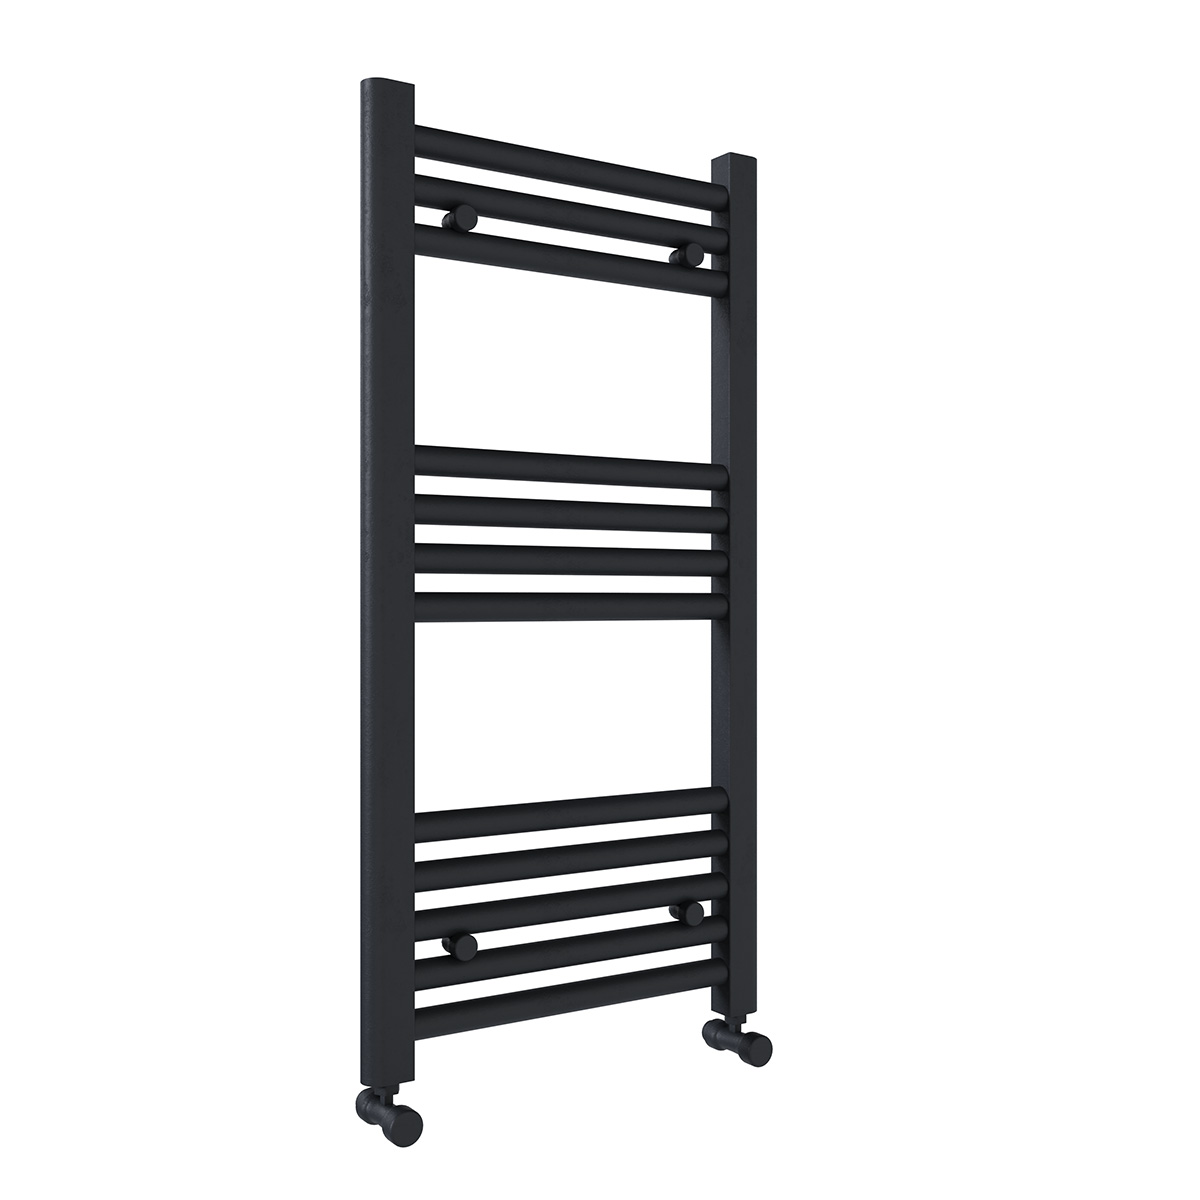 Roma Straight Heated Towel Rail - 800mm x 400mm - Anthracite (11052)